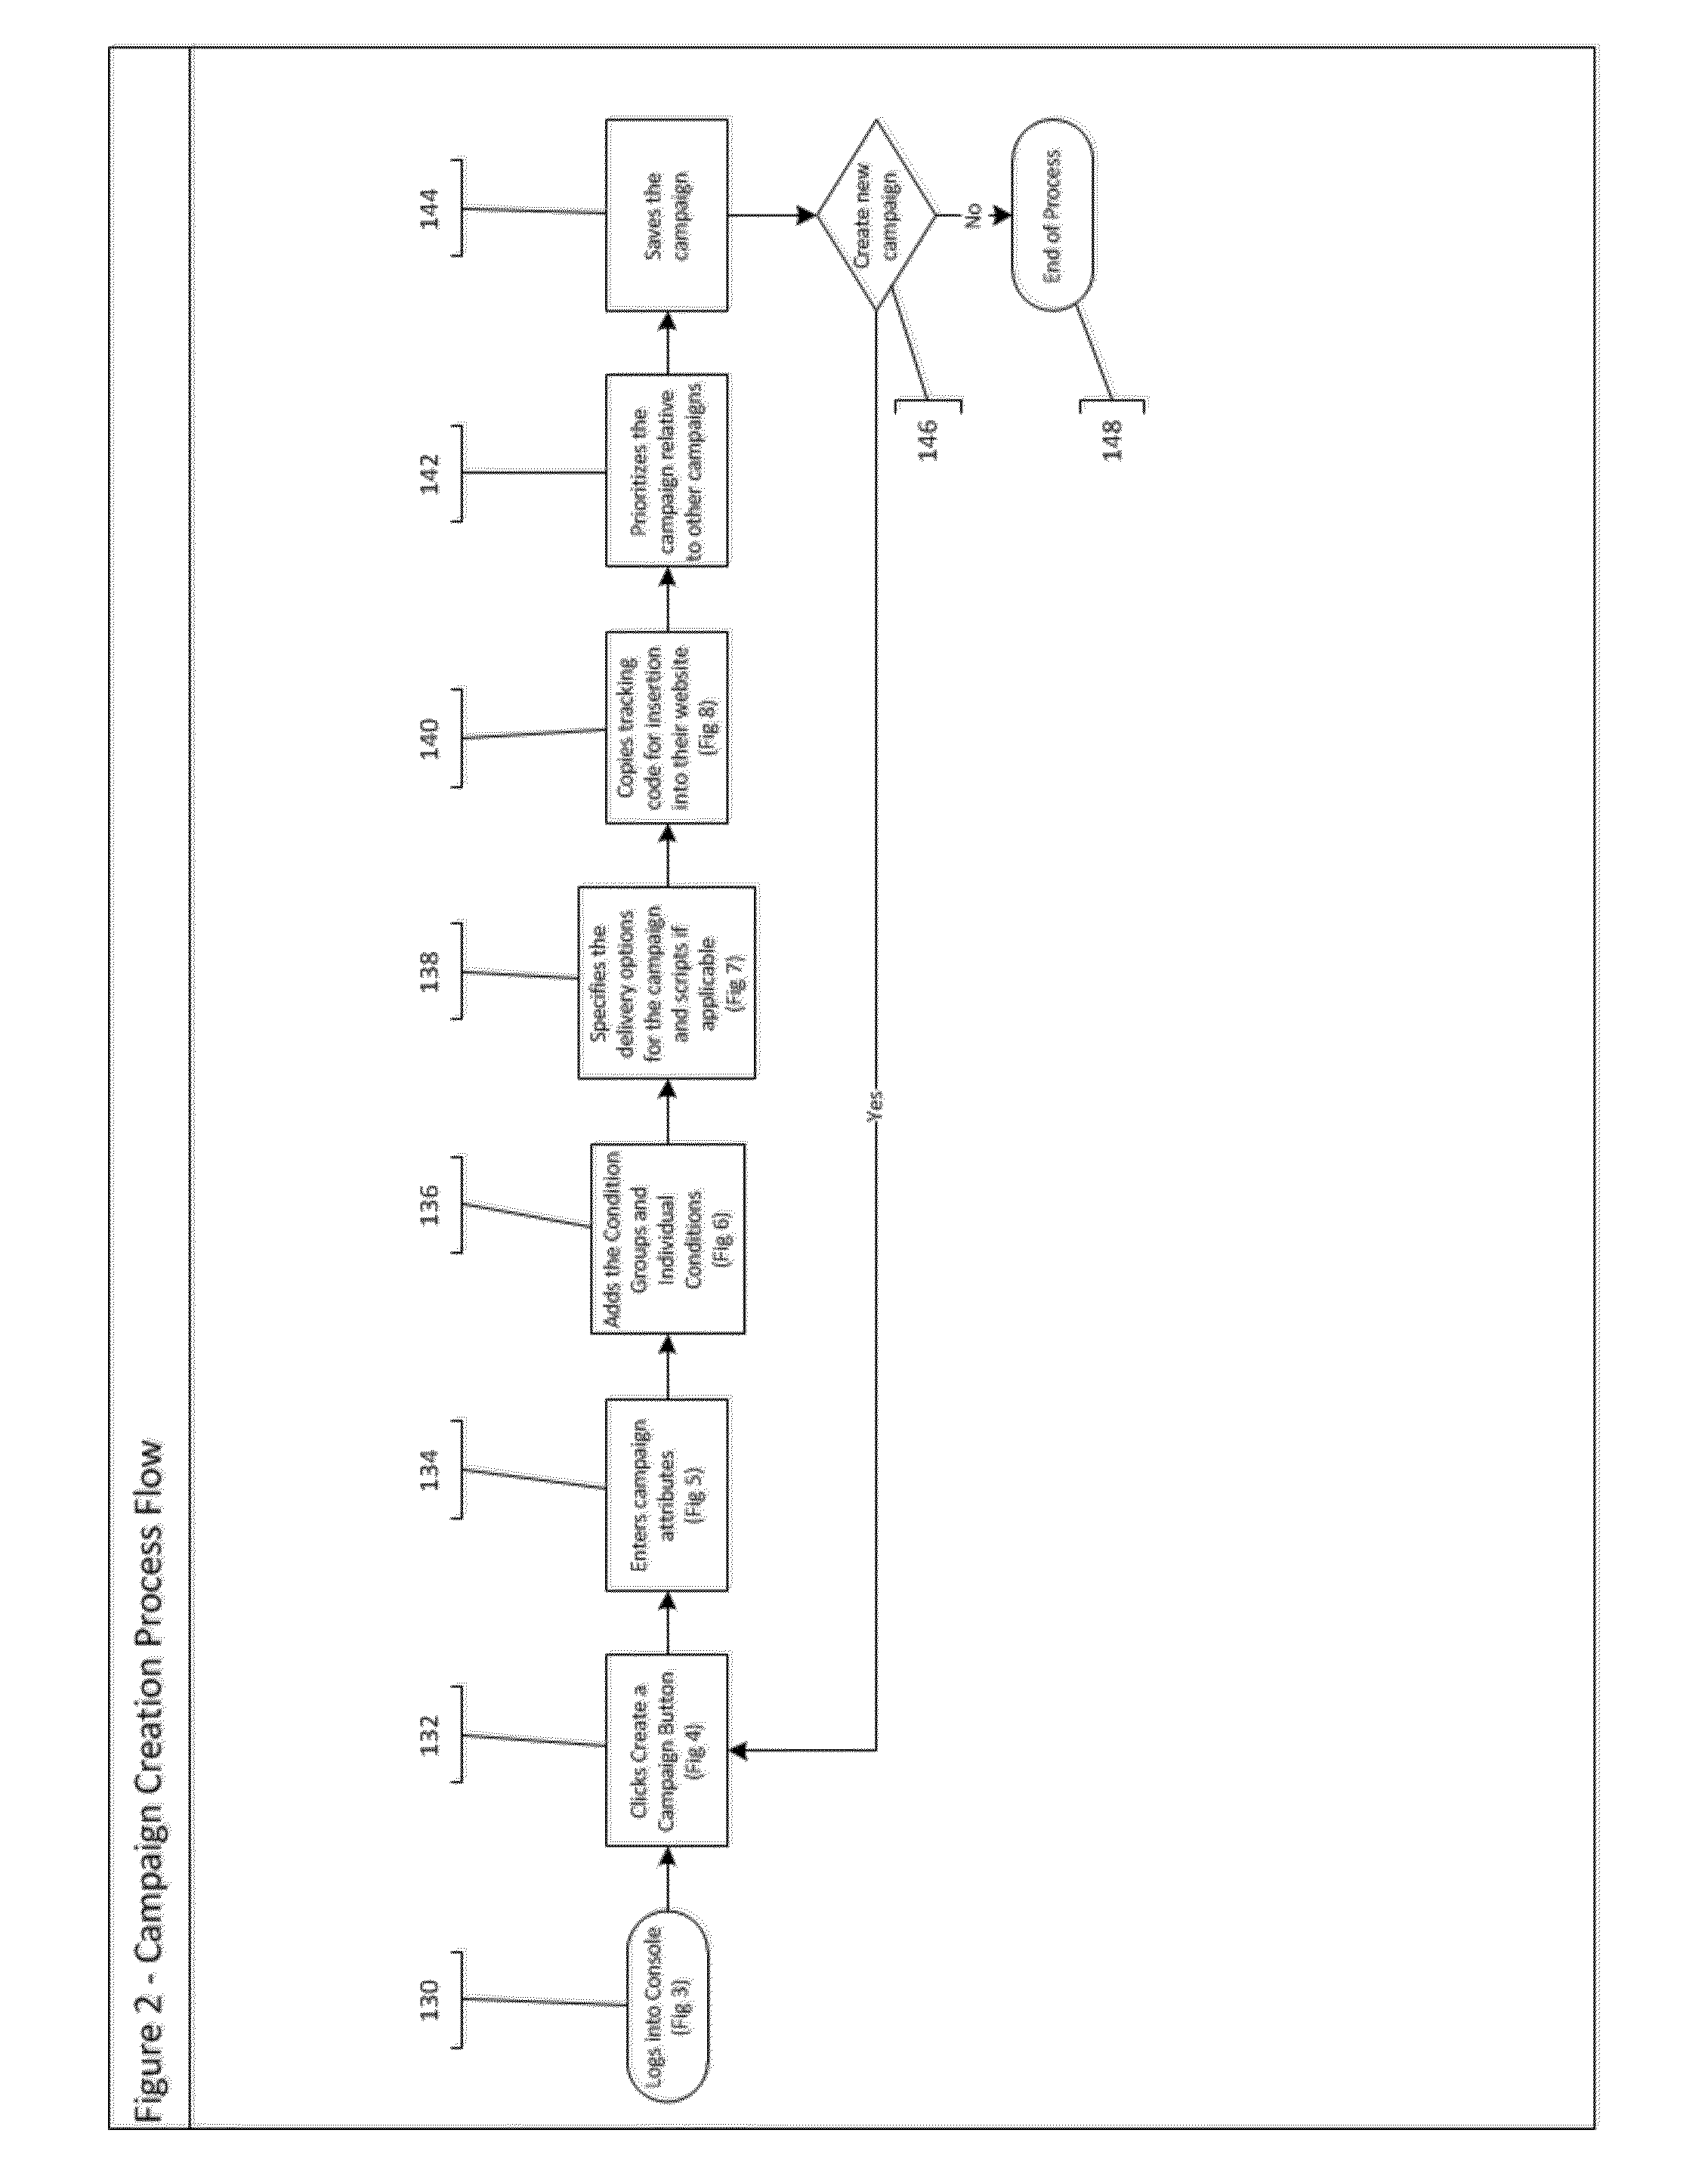 System and method for the selection and delivery of a customized consumer offer or engagement dialog by a live customer service representative in communication with a consumer